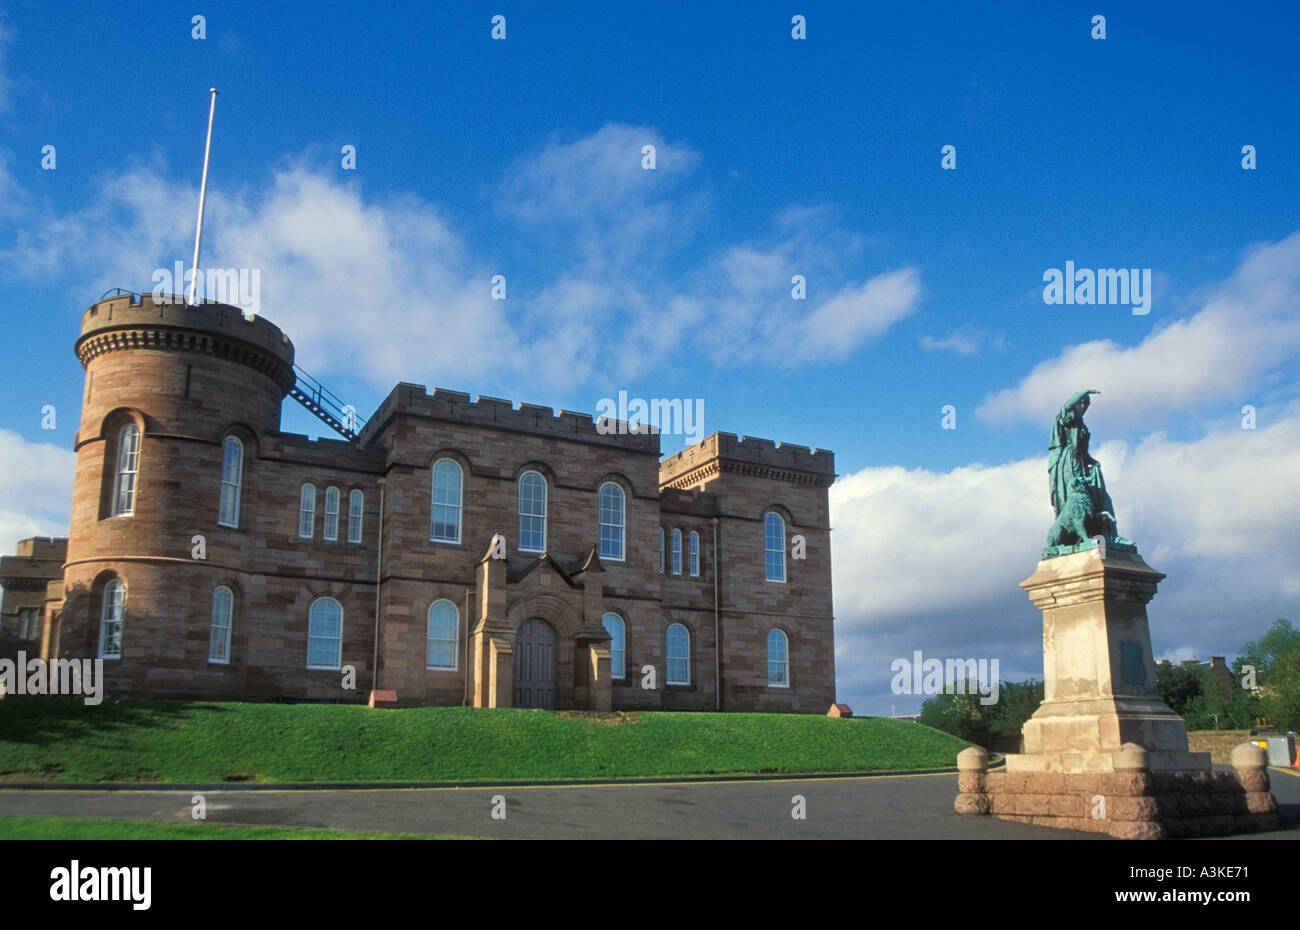 Front facade of Inverness castle with statue of Flora Macdonald Highlands Scotland GB UK EU Europe Stock Photo